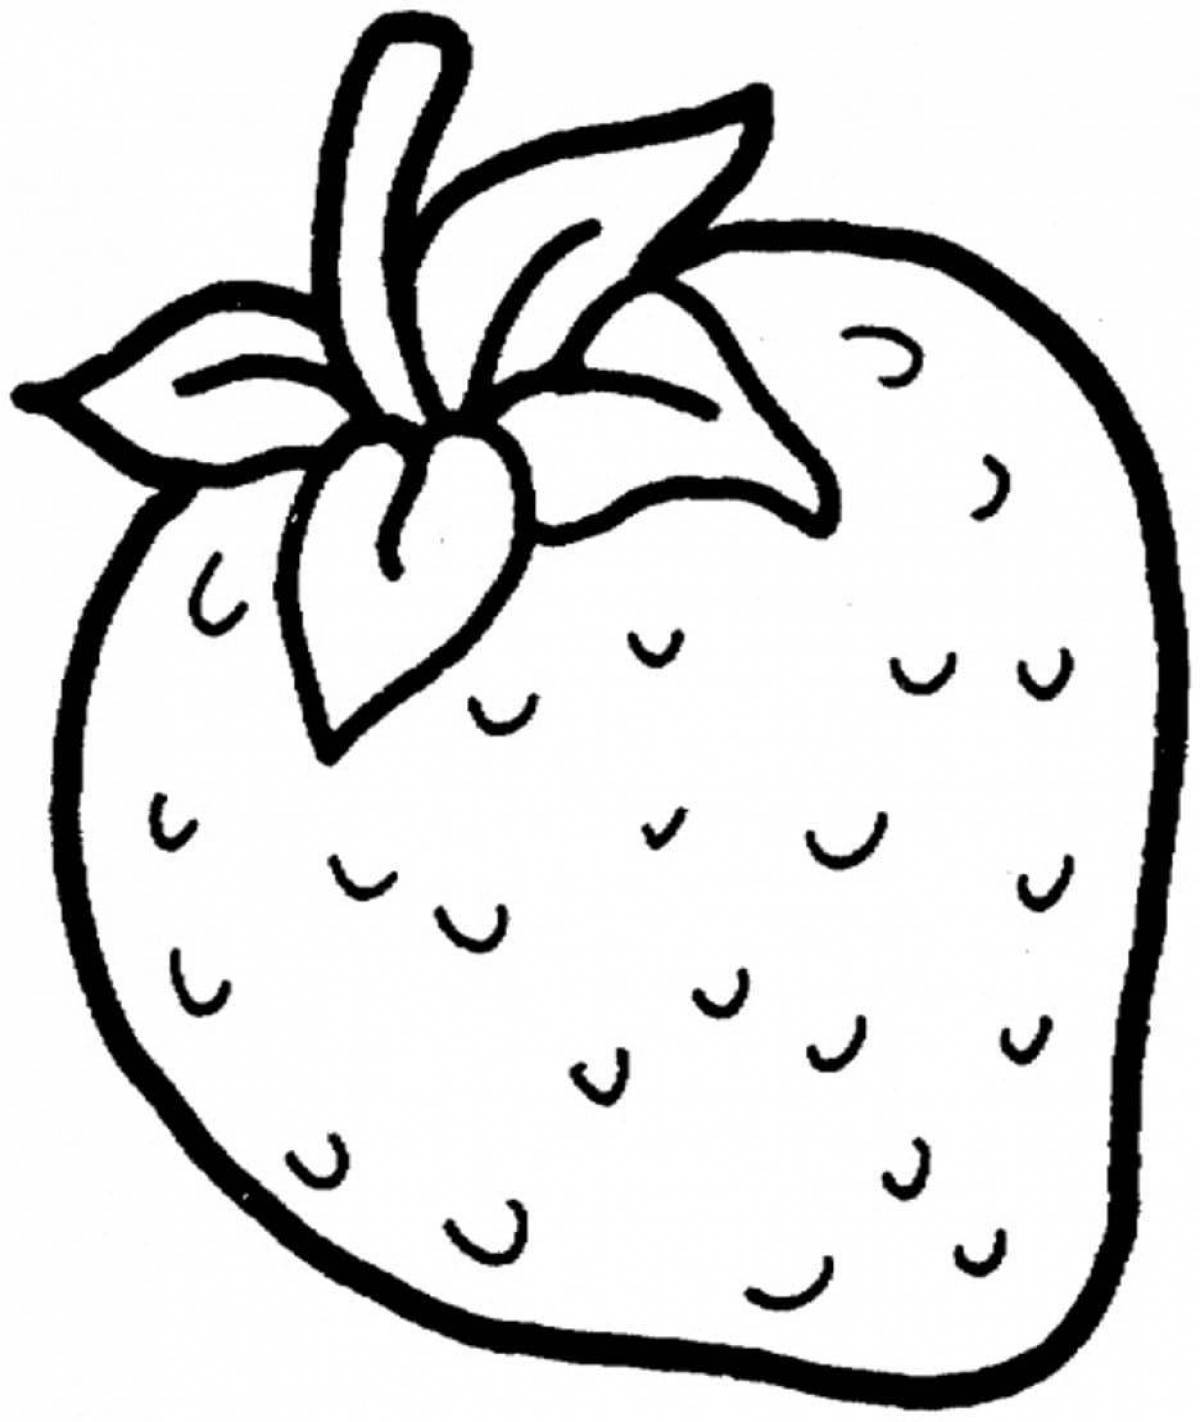 Sunny strawberry coloring page